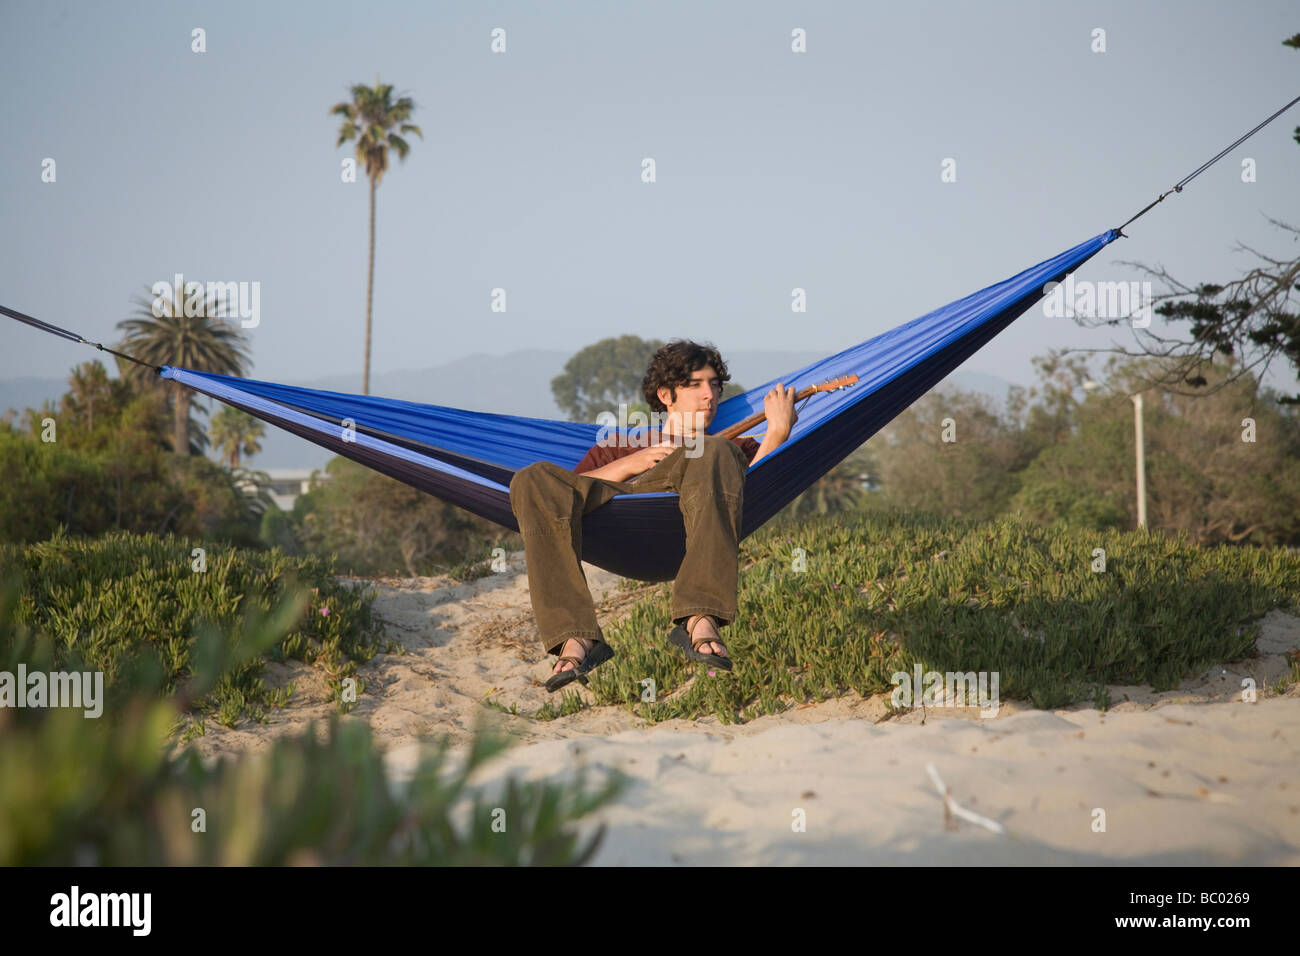 A man relaxing and playing a guitar in a hammock on the beach. Stock Photo